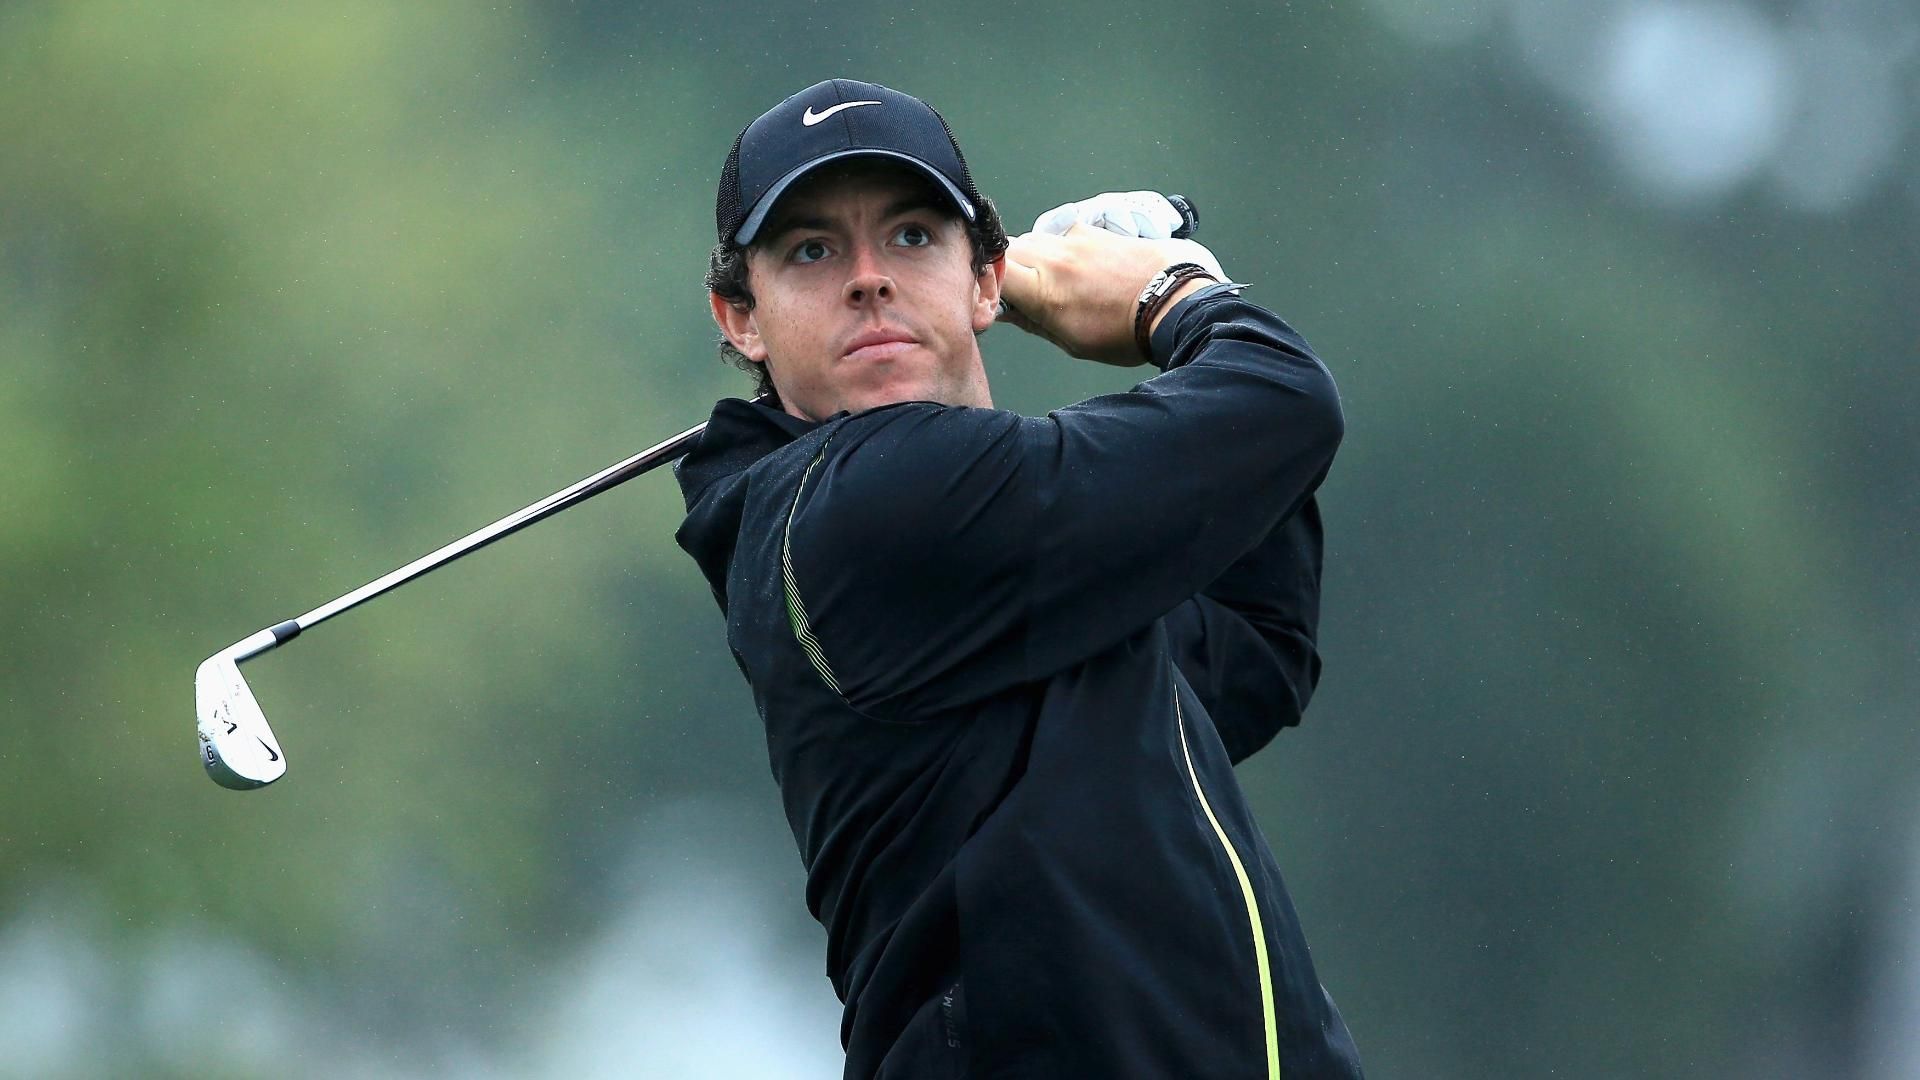 McIlroy Rusty, Projected To Miss Cut